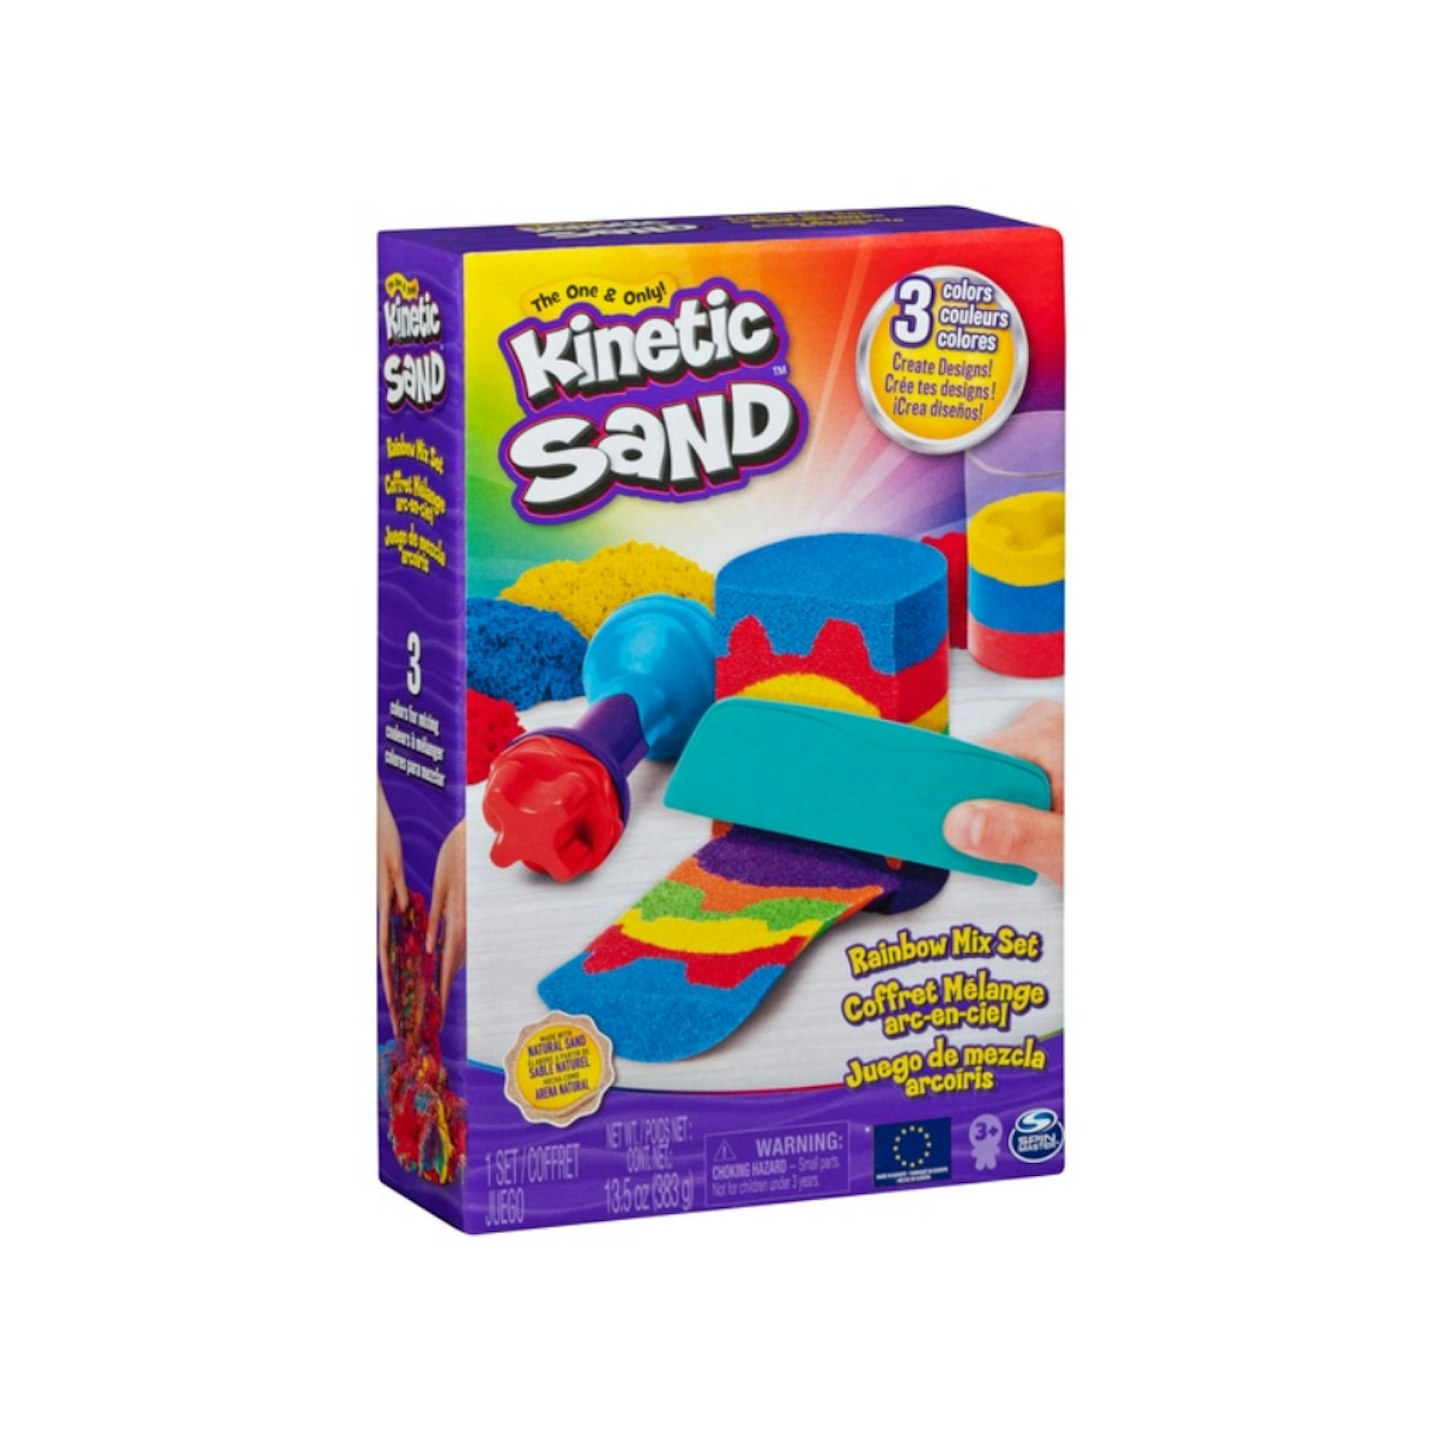 Kinetic Sand Rainbow Mix Set with 3 Colours of Kinetic Sand (382g) and 6 Tools